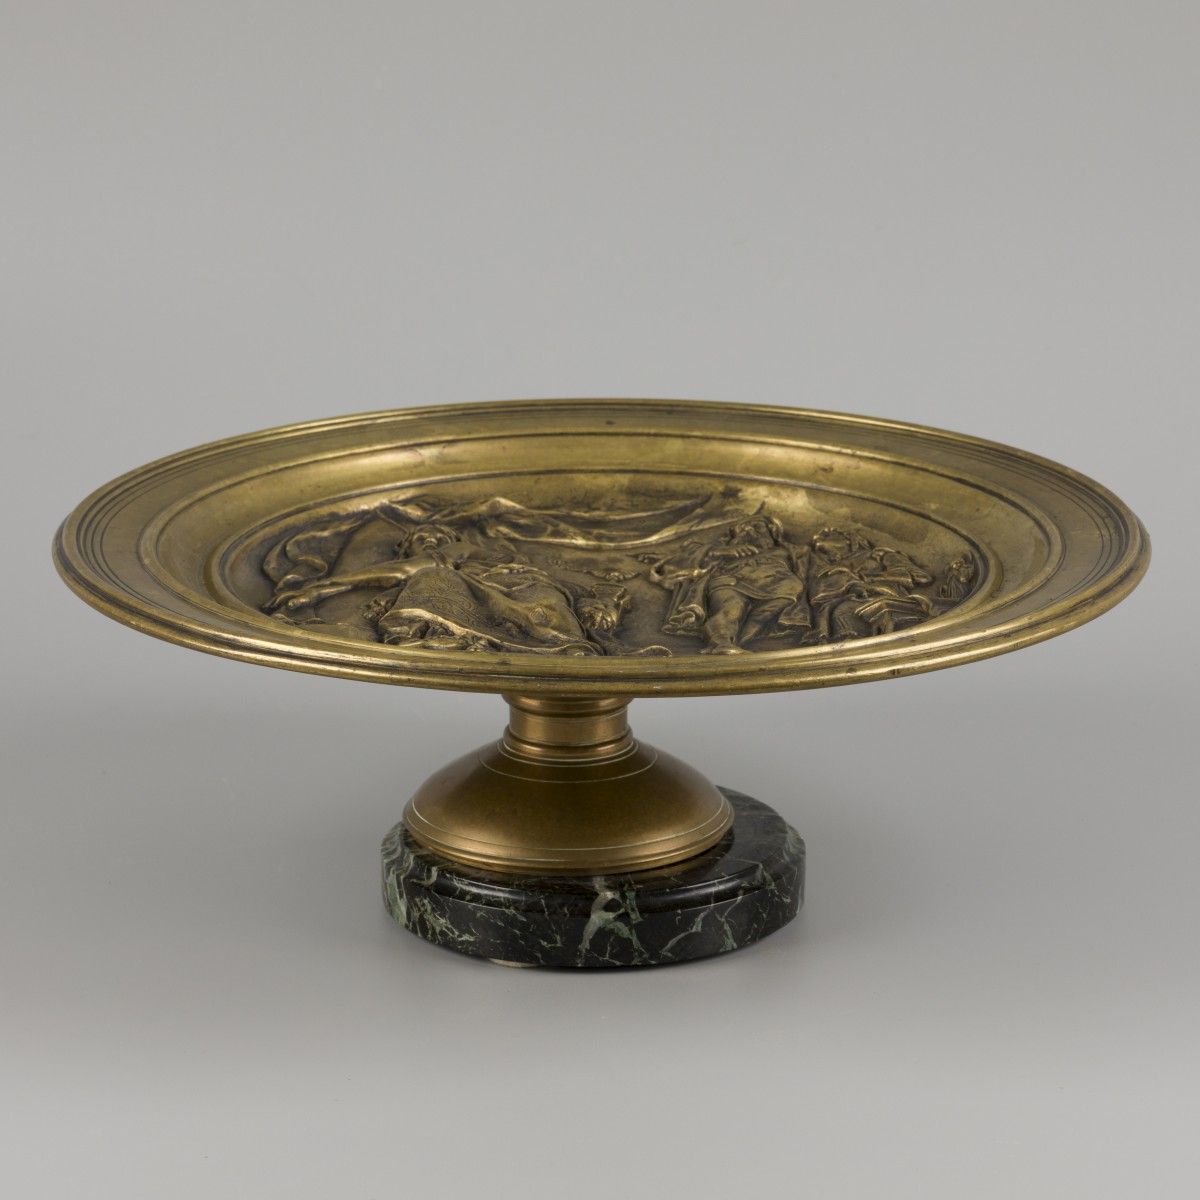 A bronze tazza with decor depicting a scene from 'Macbeth', England, ca. 1930. A&hellip;